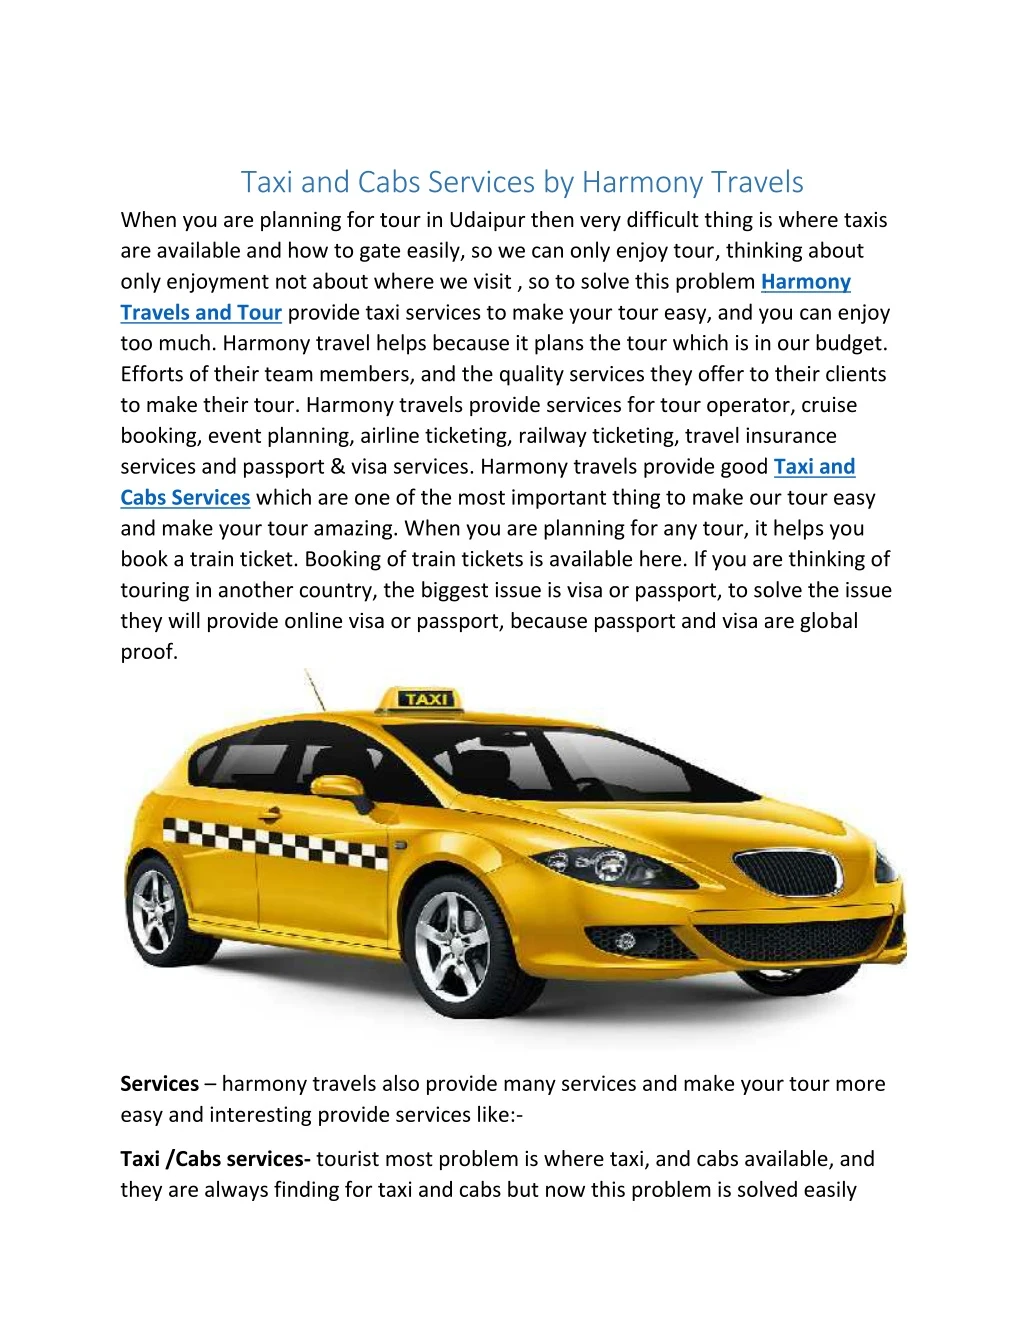 taxi and cabs services by harmony travels when